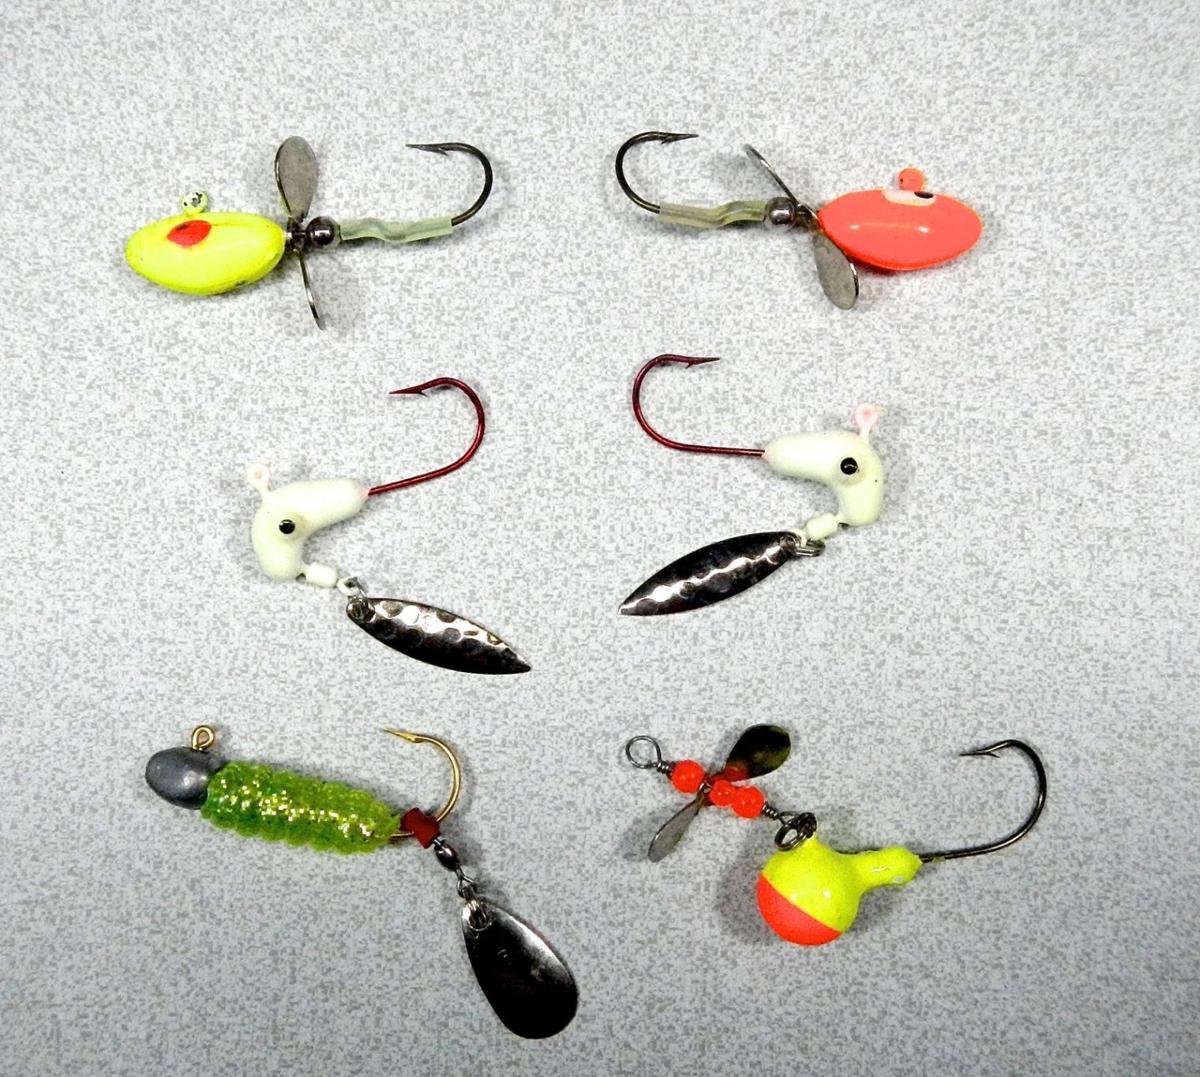 Carolina Outdoor Journal, Beetle Spin Lure, Gear time: Using the popular